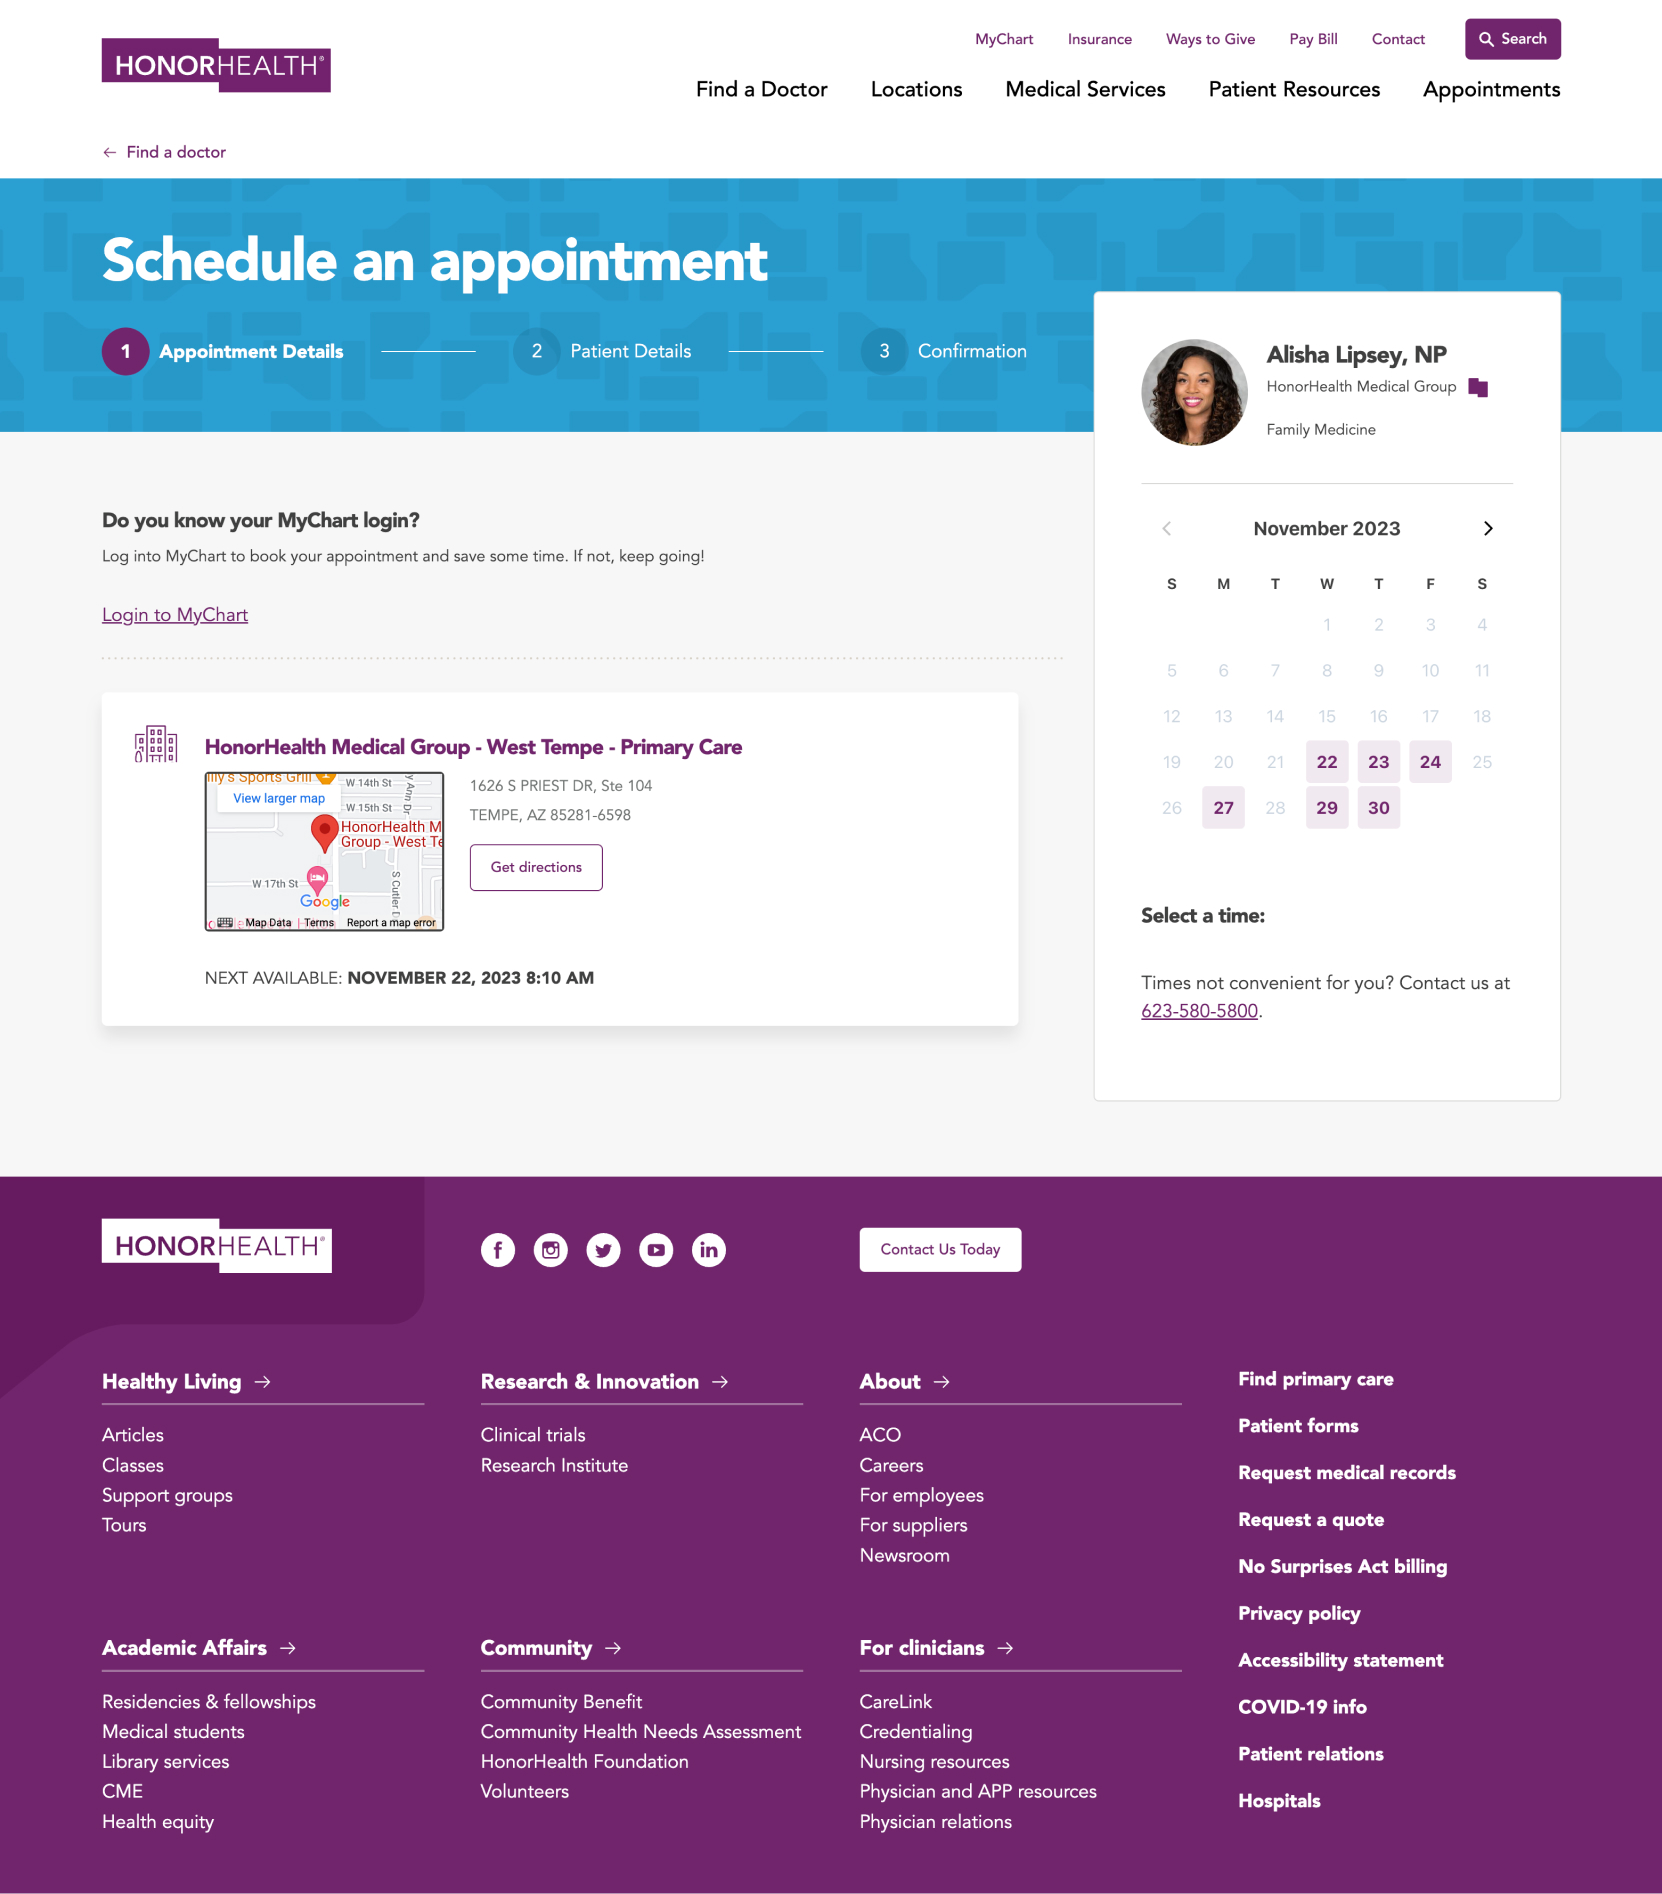 HonorHealth Appointments page